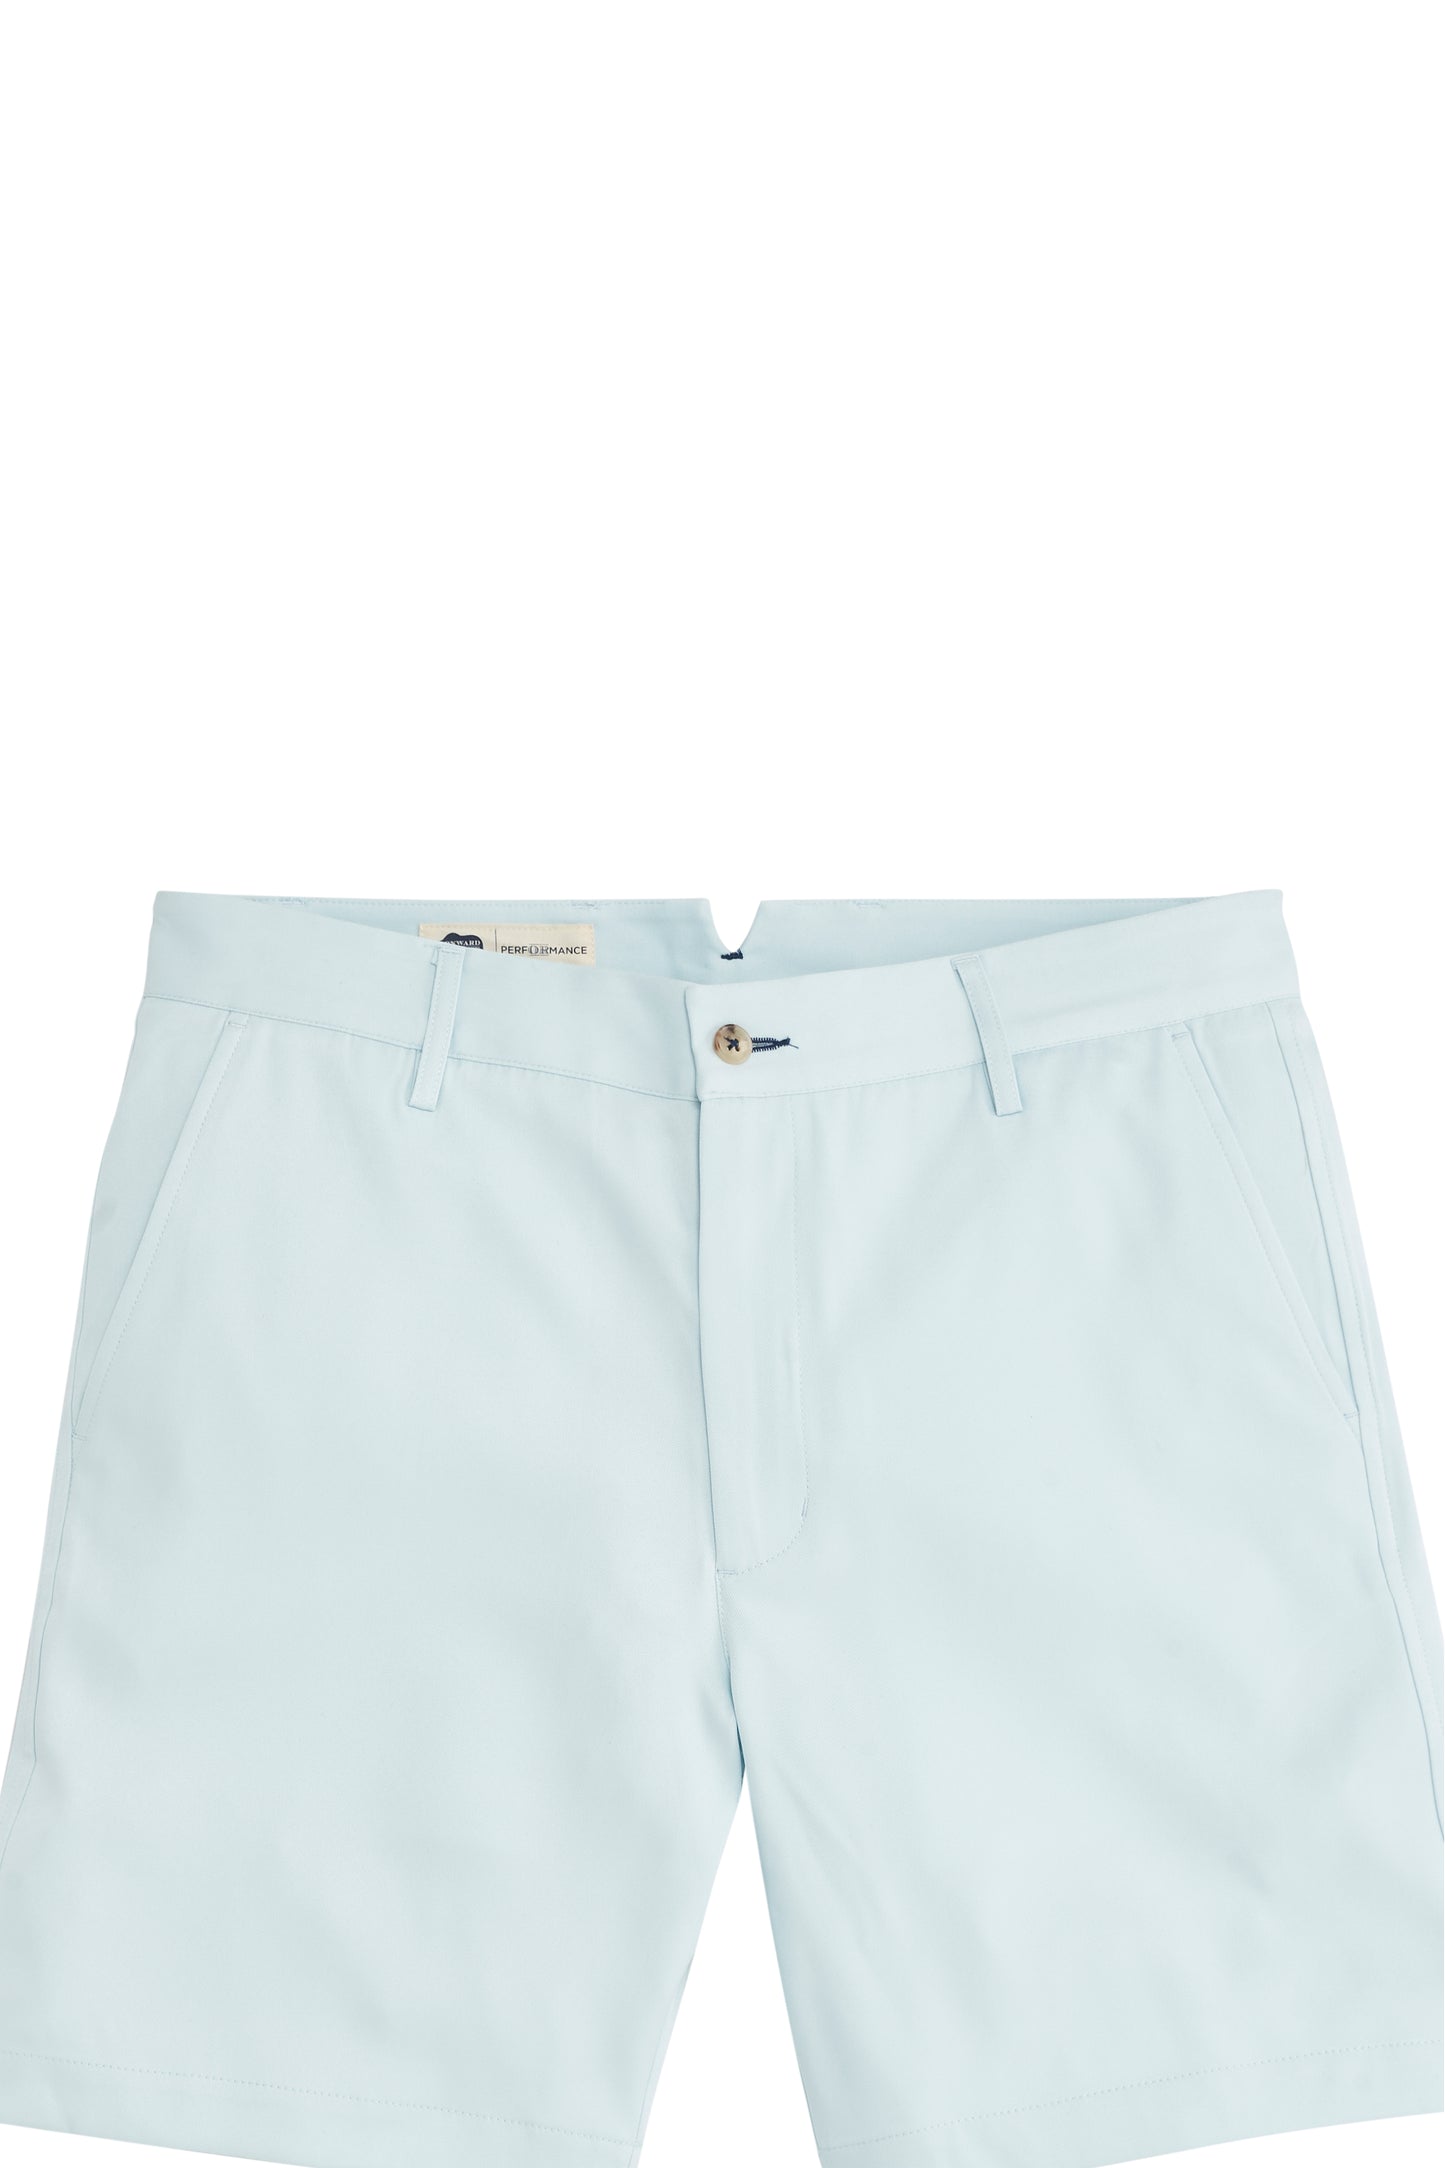 Gimme Performance Golf Shorts - Delicate Blue